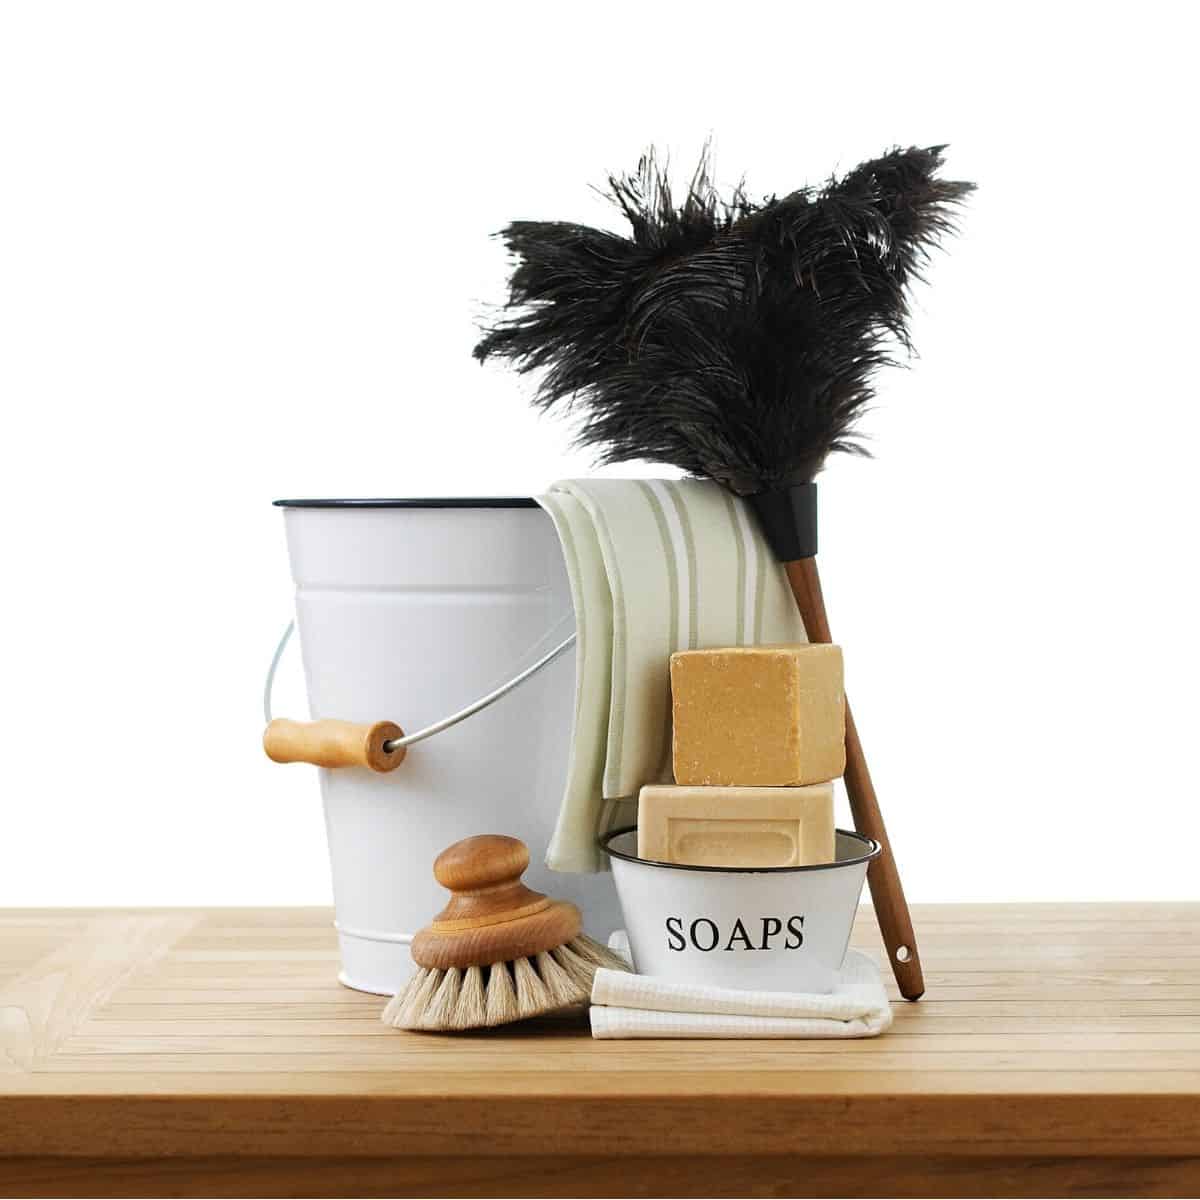 White bucket with wooden handle, striped towel draped over the side of the bucket with black feather duster, wooden scrub brush, and tin with homemade soaps stacked inside.